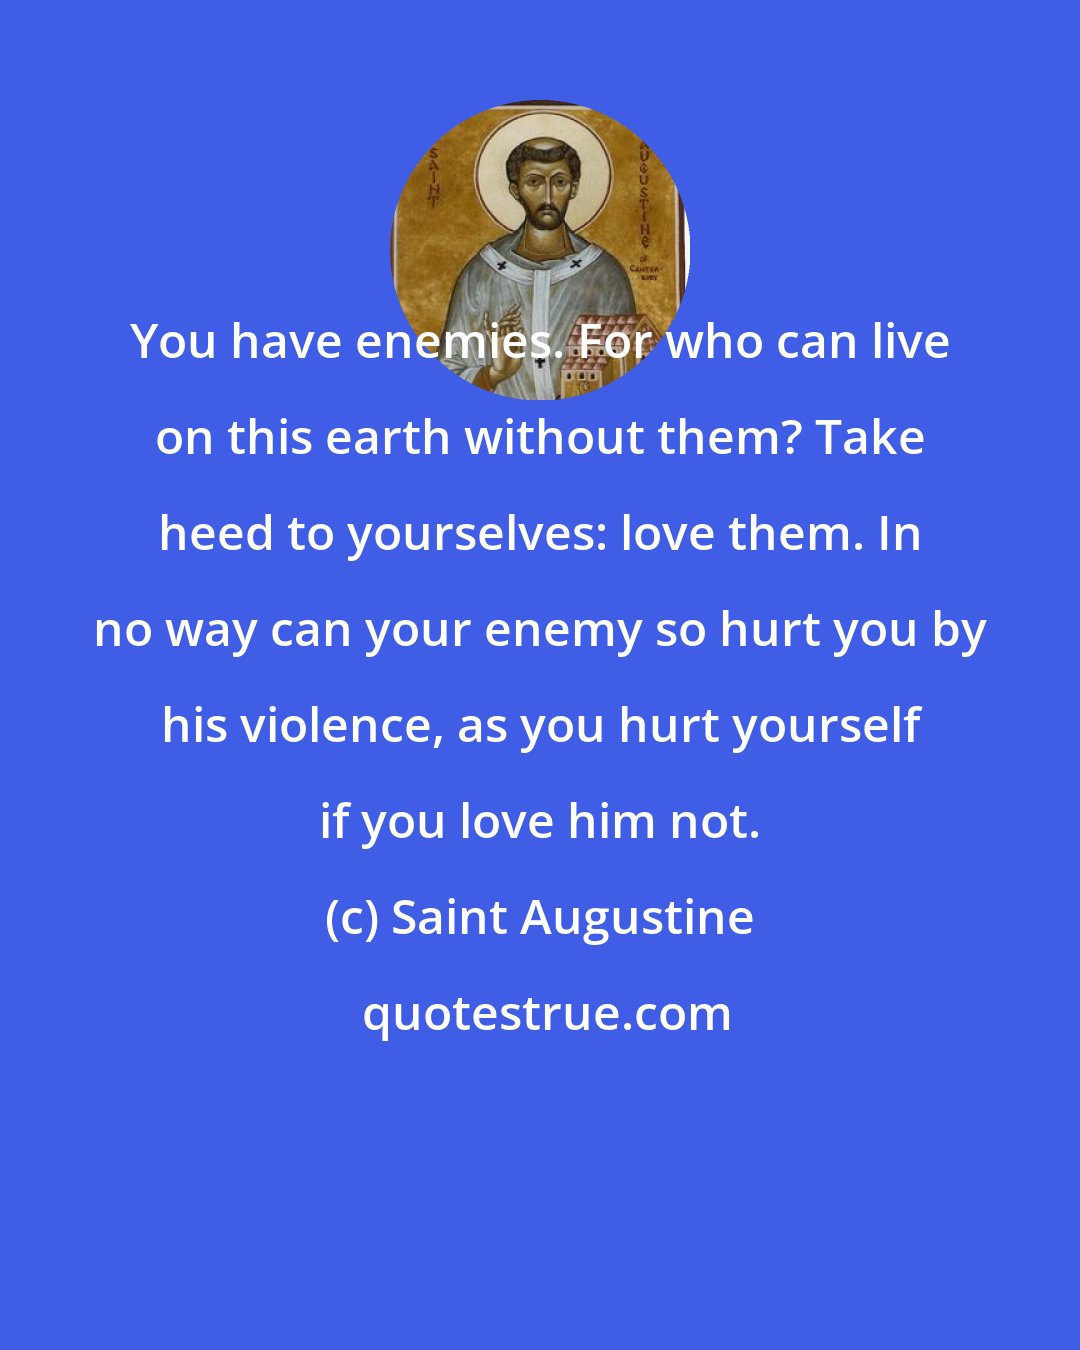 Saint Augustine: You have enemies. For who can live on this earth without them? Take heed to yourselves: love them. In no way can your enemy so hurt you by his violence, as you hurt yourself if you love him not.